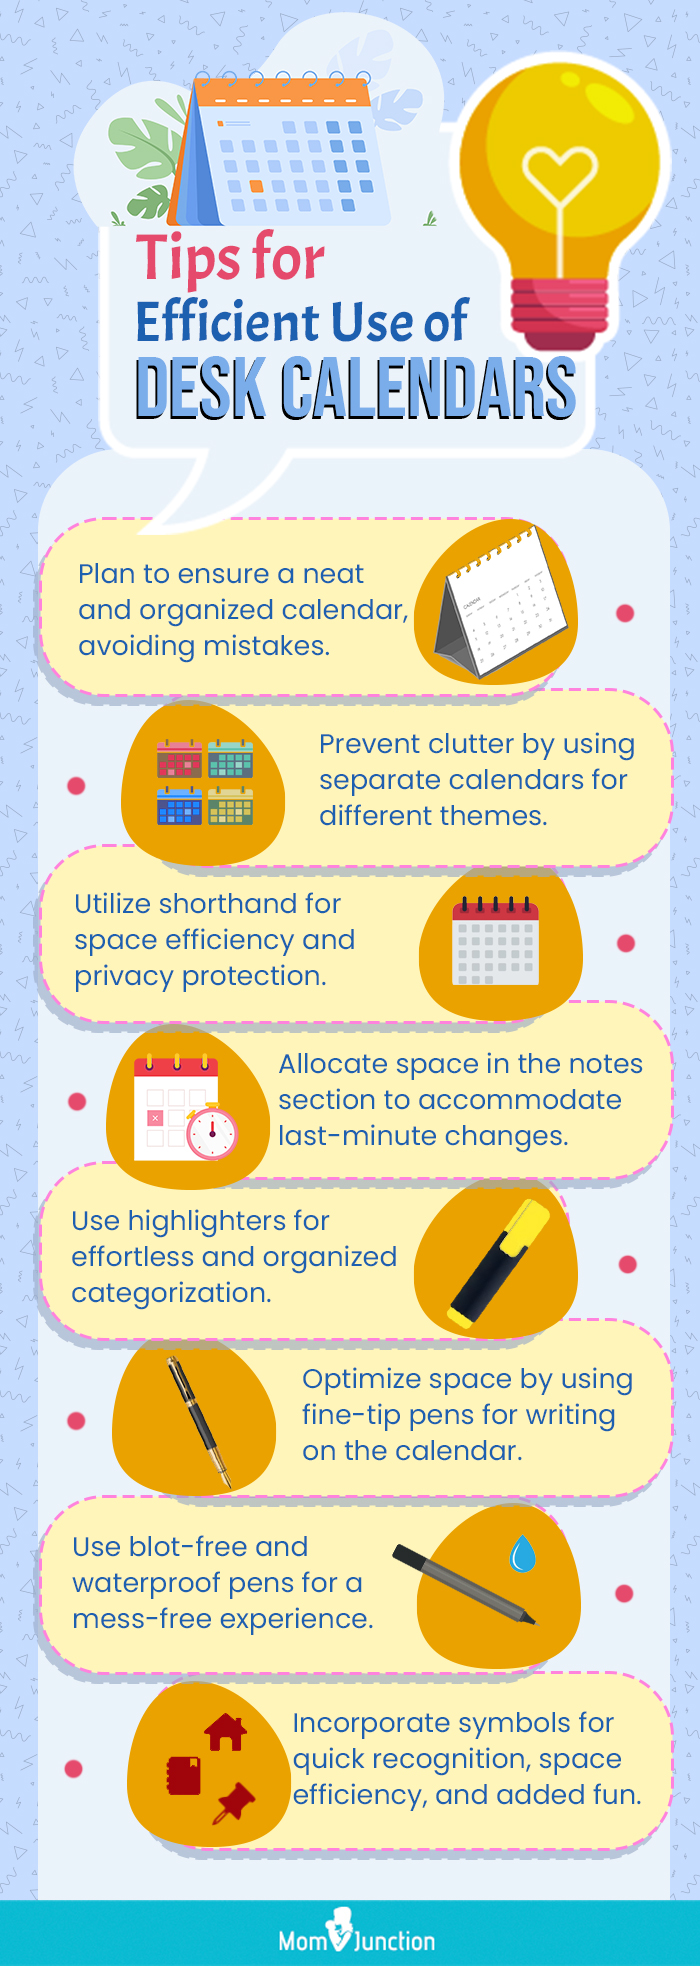 Tips For Efficient Use Of Desk Calendars (infographic)